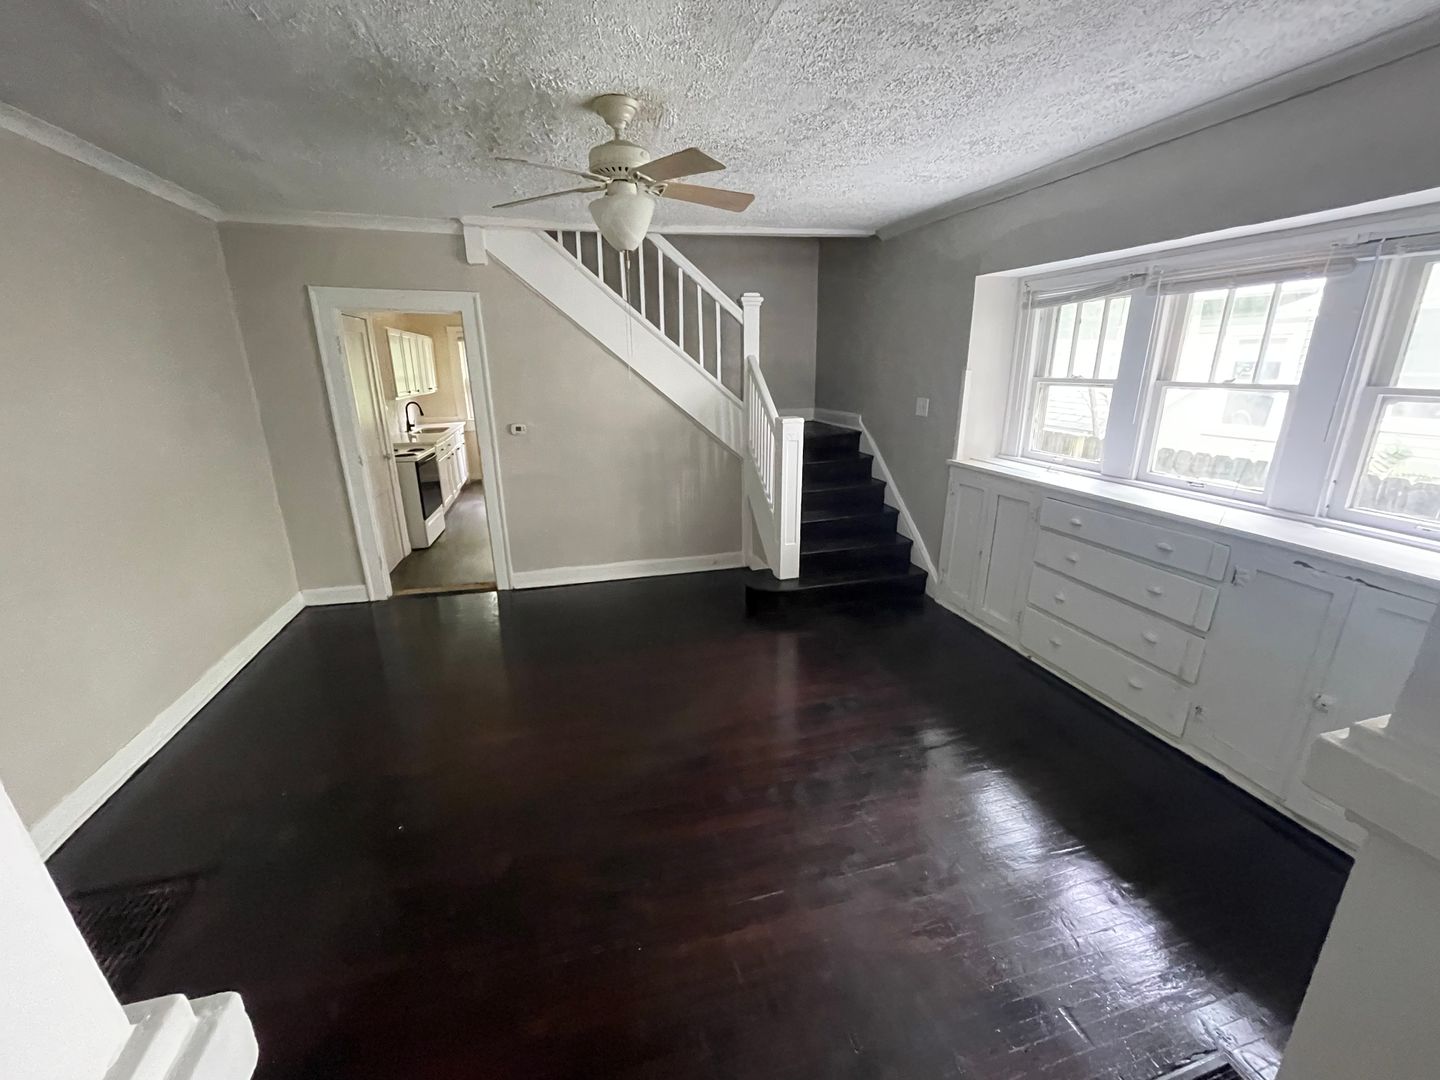 Charming 3BR/1BA Two-story Half Double